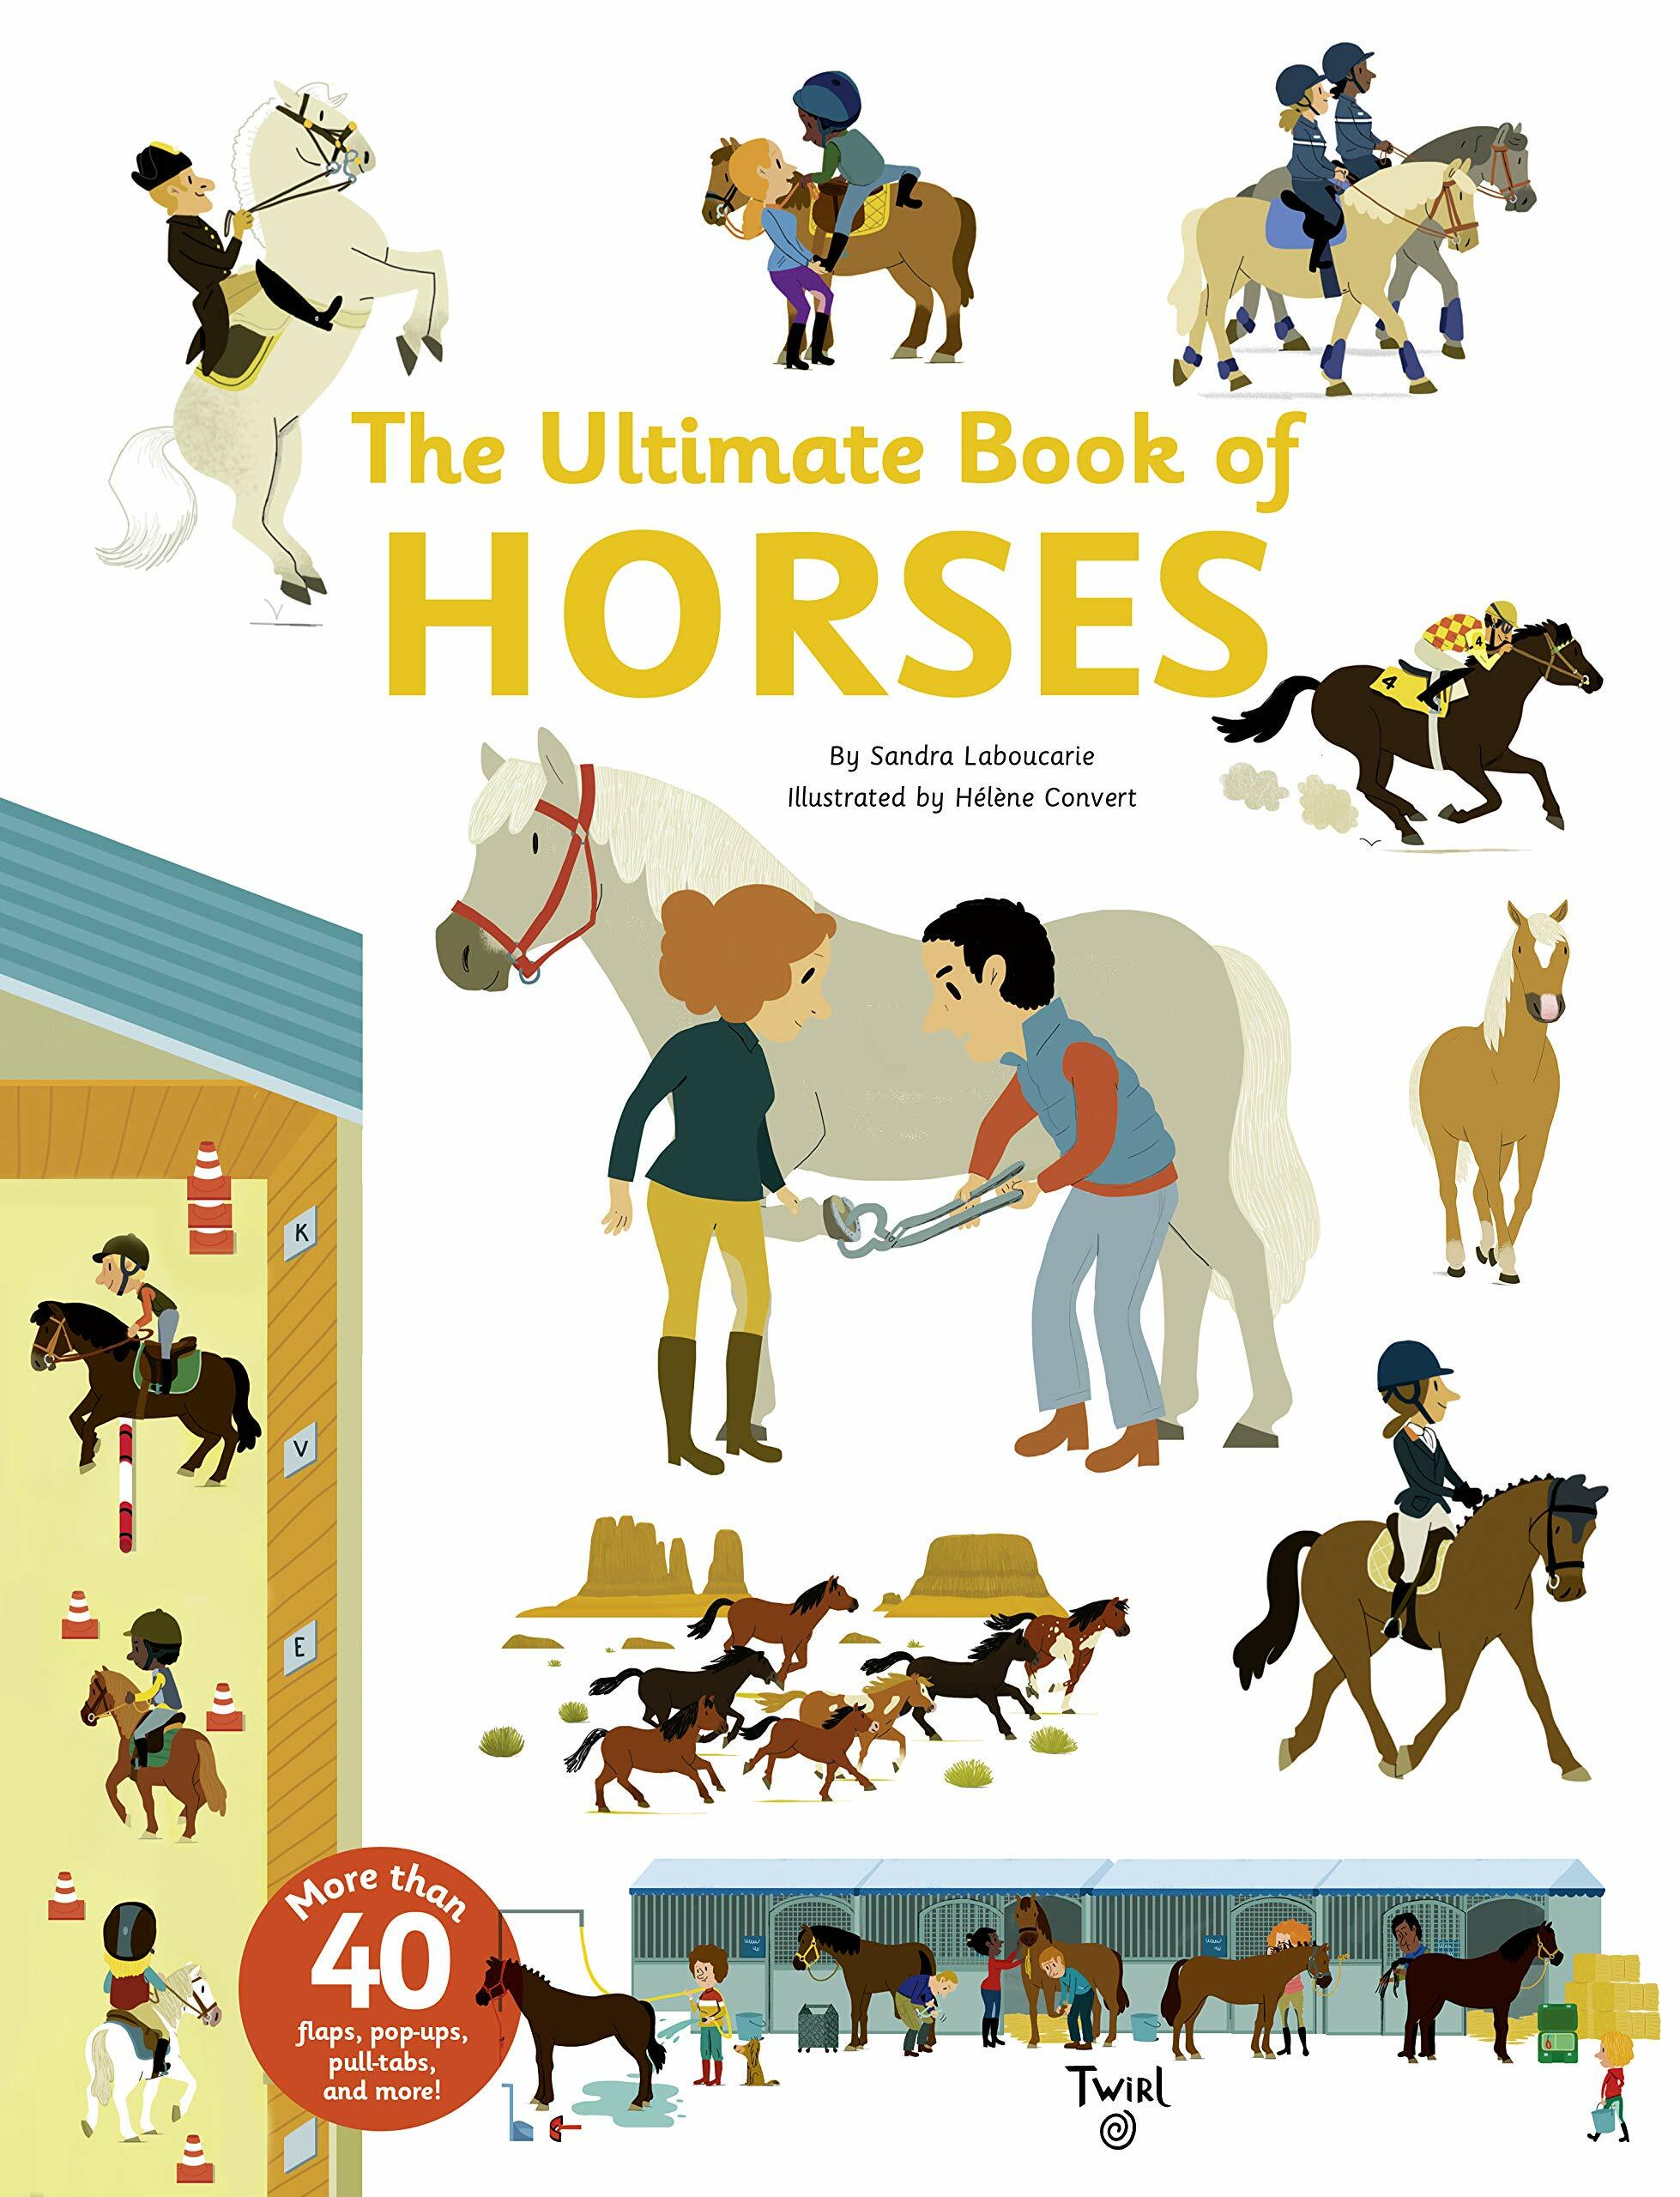 The Ultimate Book of Horses (Hardcover)